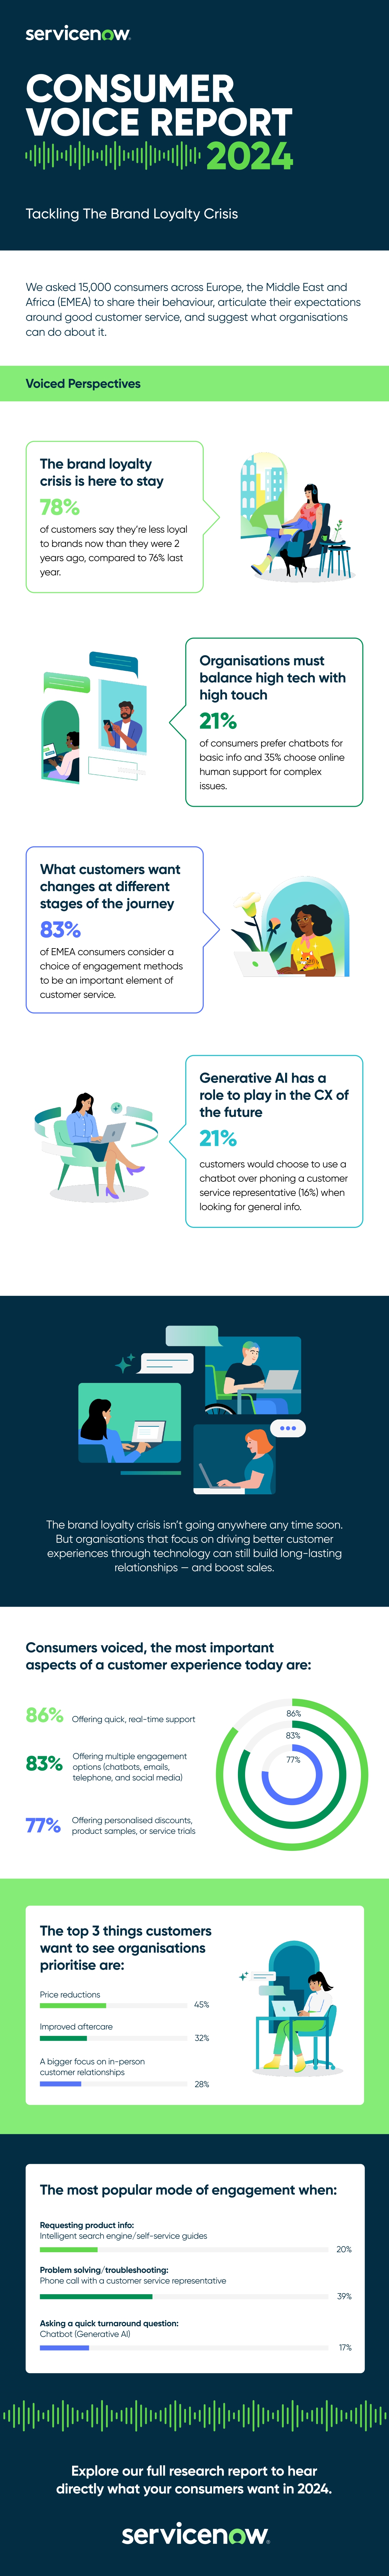 info-emea-consumer-voice-infographic-2024_page-0001